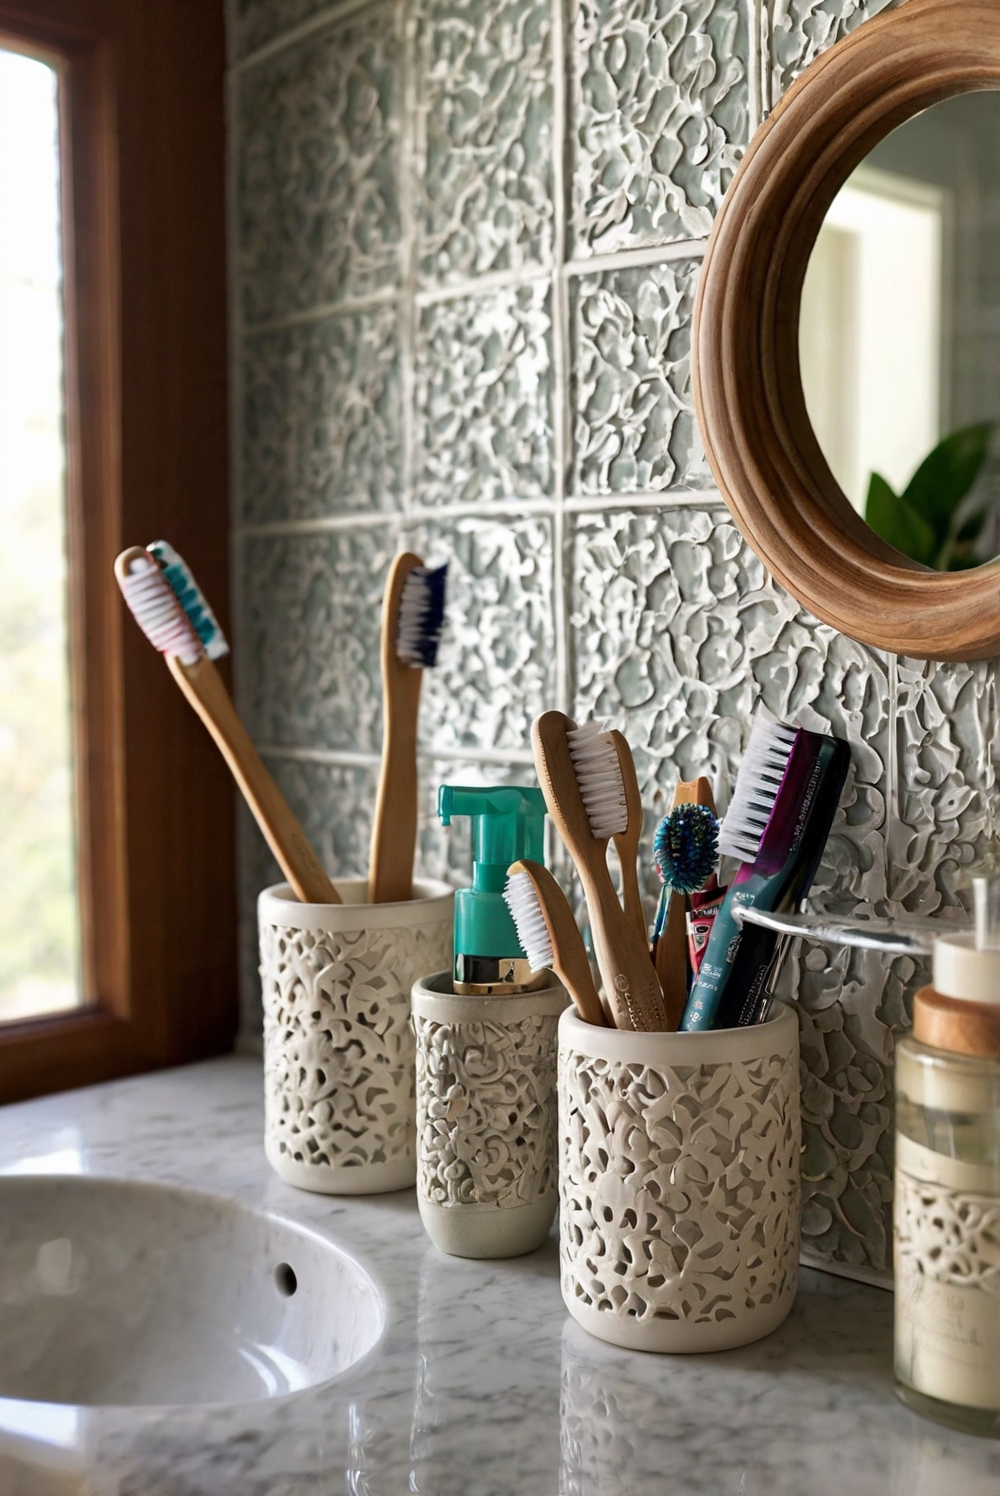 toothbrush holder organizer, toothbrush stand, bathroom organizer, toothbrush storage, toothbrush holder wall mount, bathroom accessories, toothbrush holder suction cup home decorating, home interior design, interior design space planning, interior bedroom design, kitchen designs, living room interior, primer paint for walls